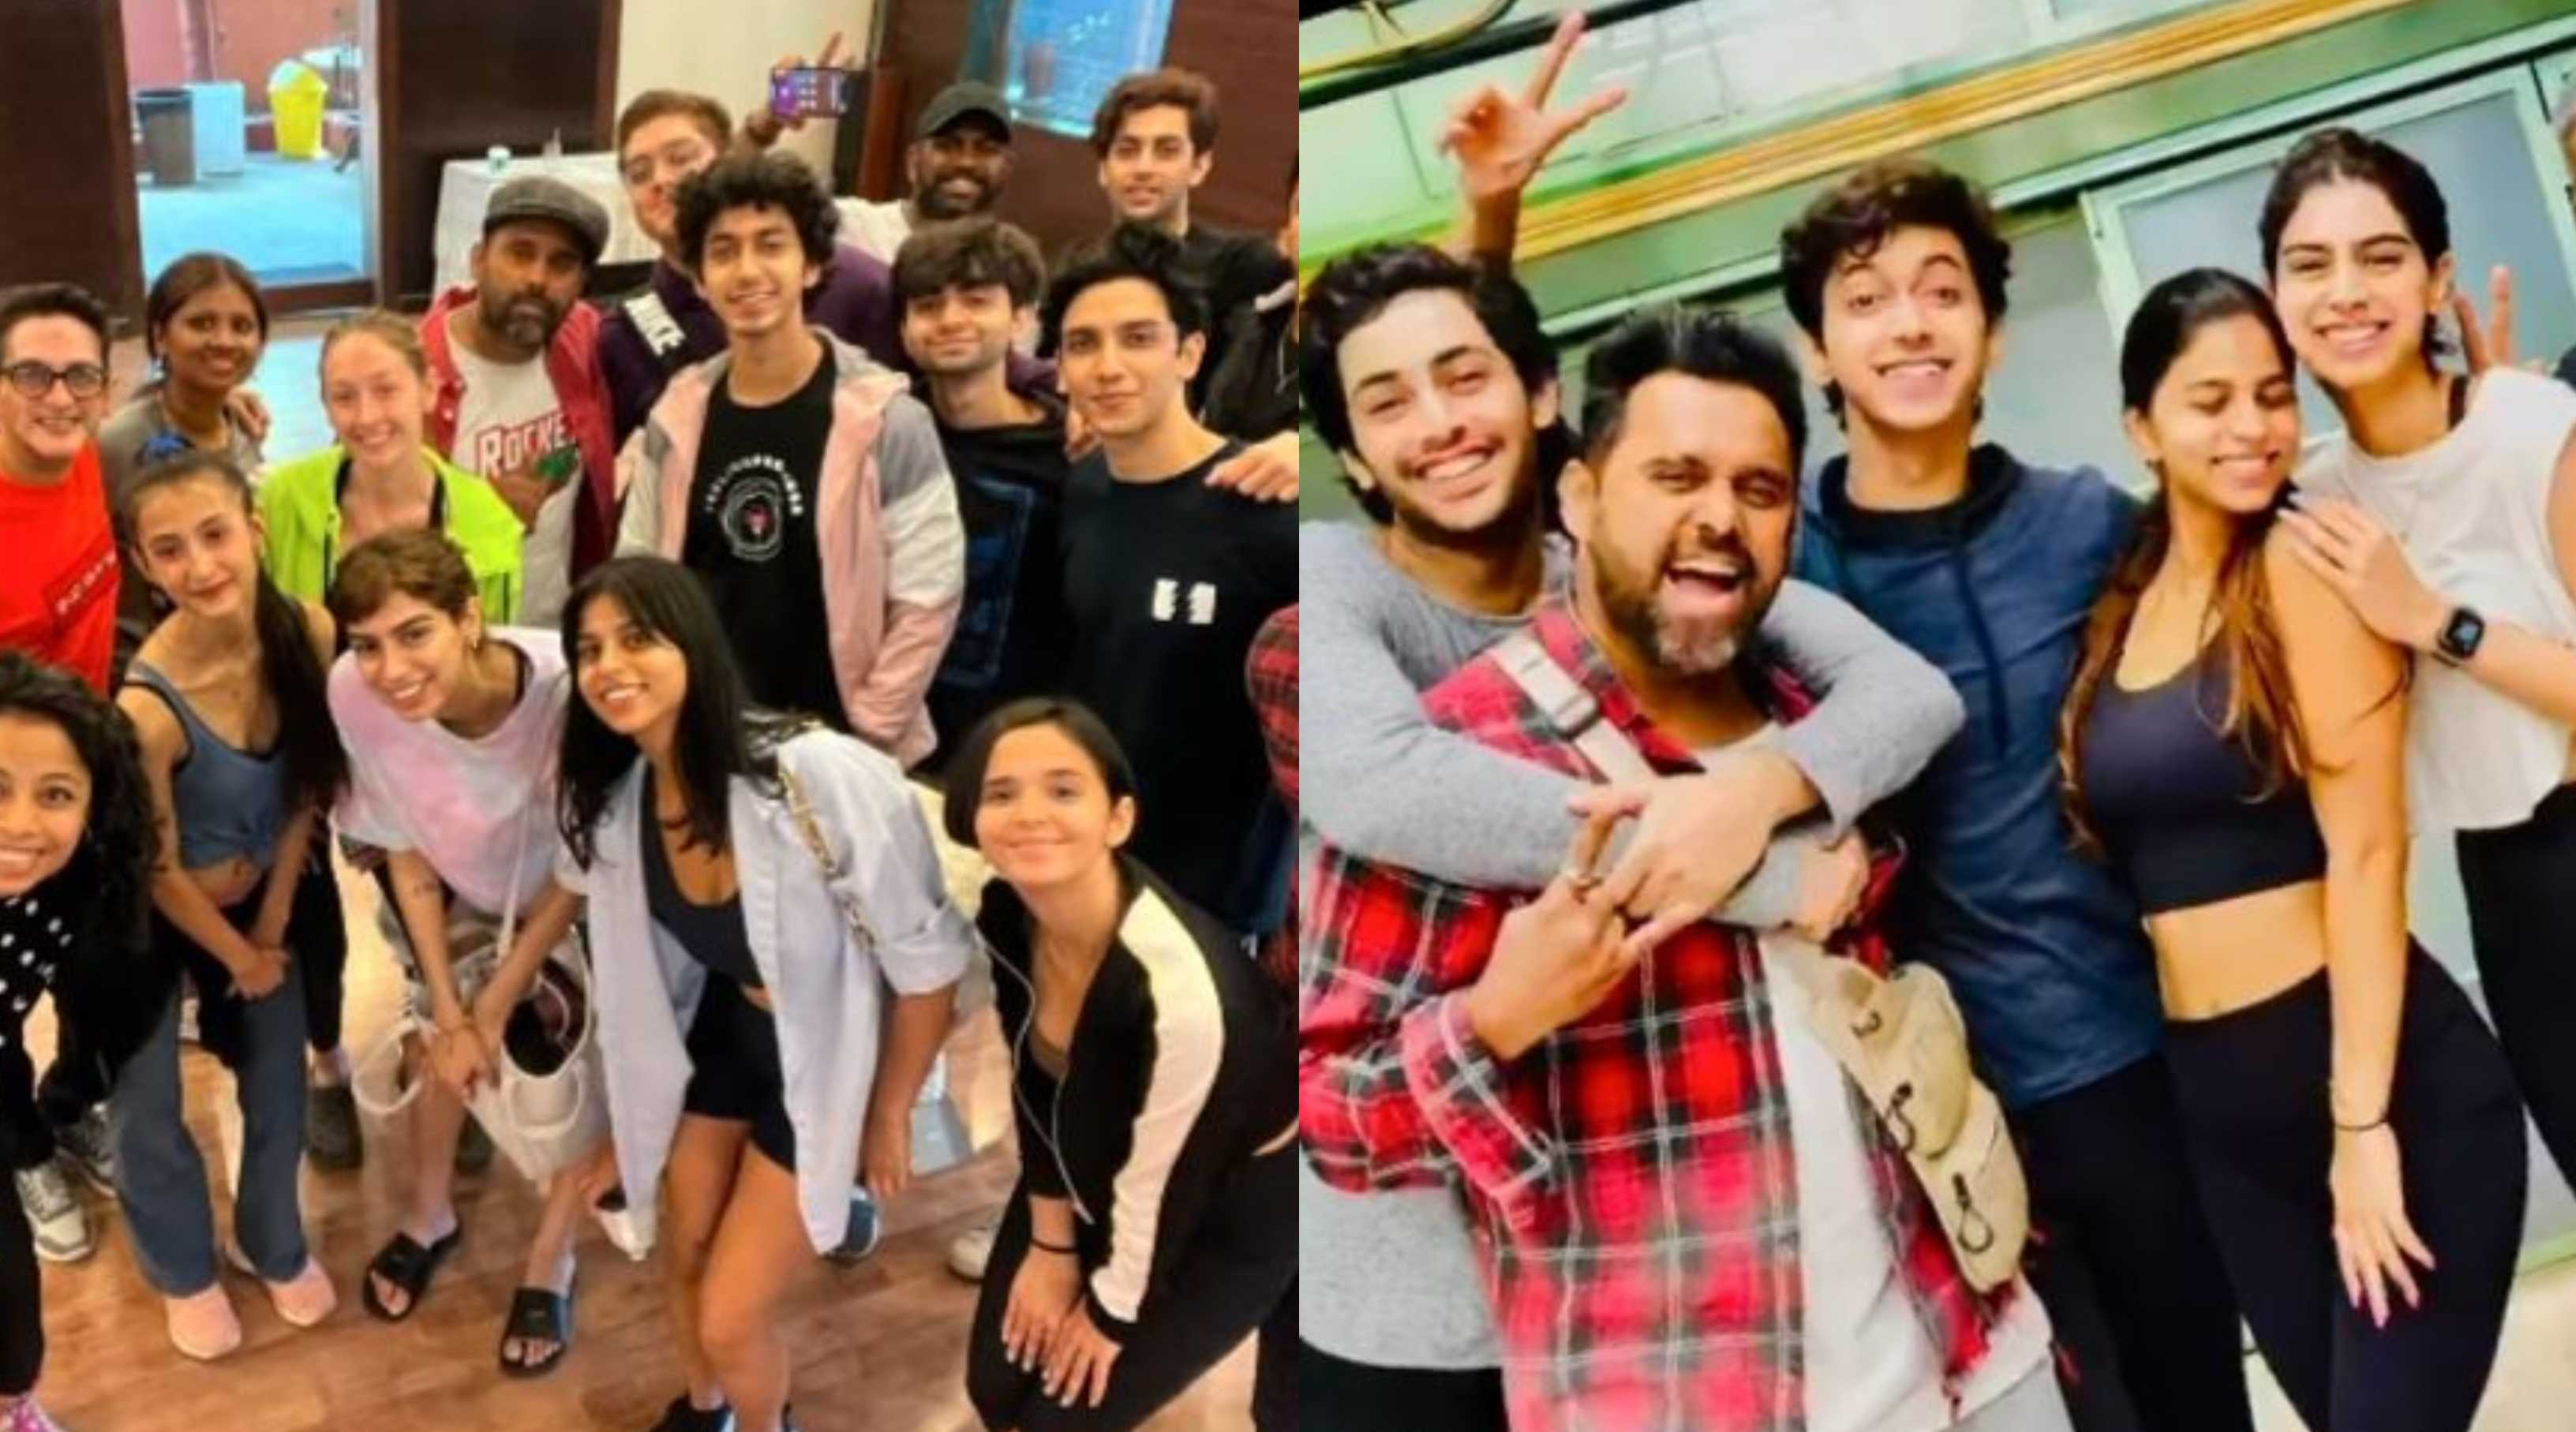 The Archies: Suhana Khan, Khushi Kapoor and Agastya Nanda look like BFFs in these unseen snaps from rehearsals